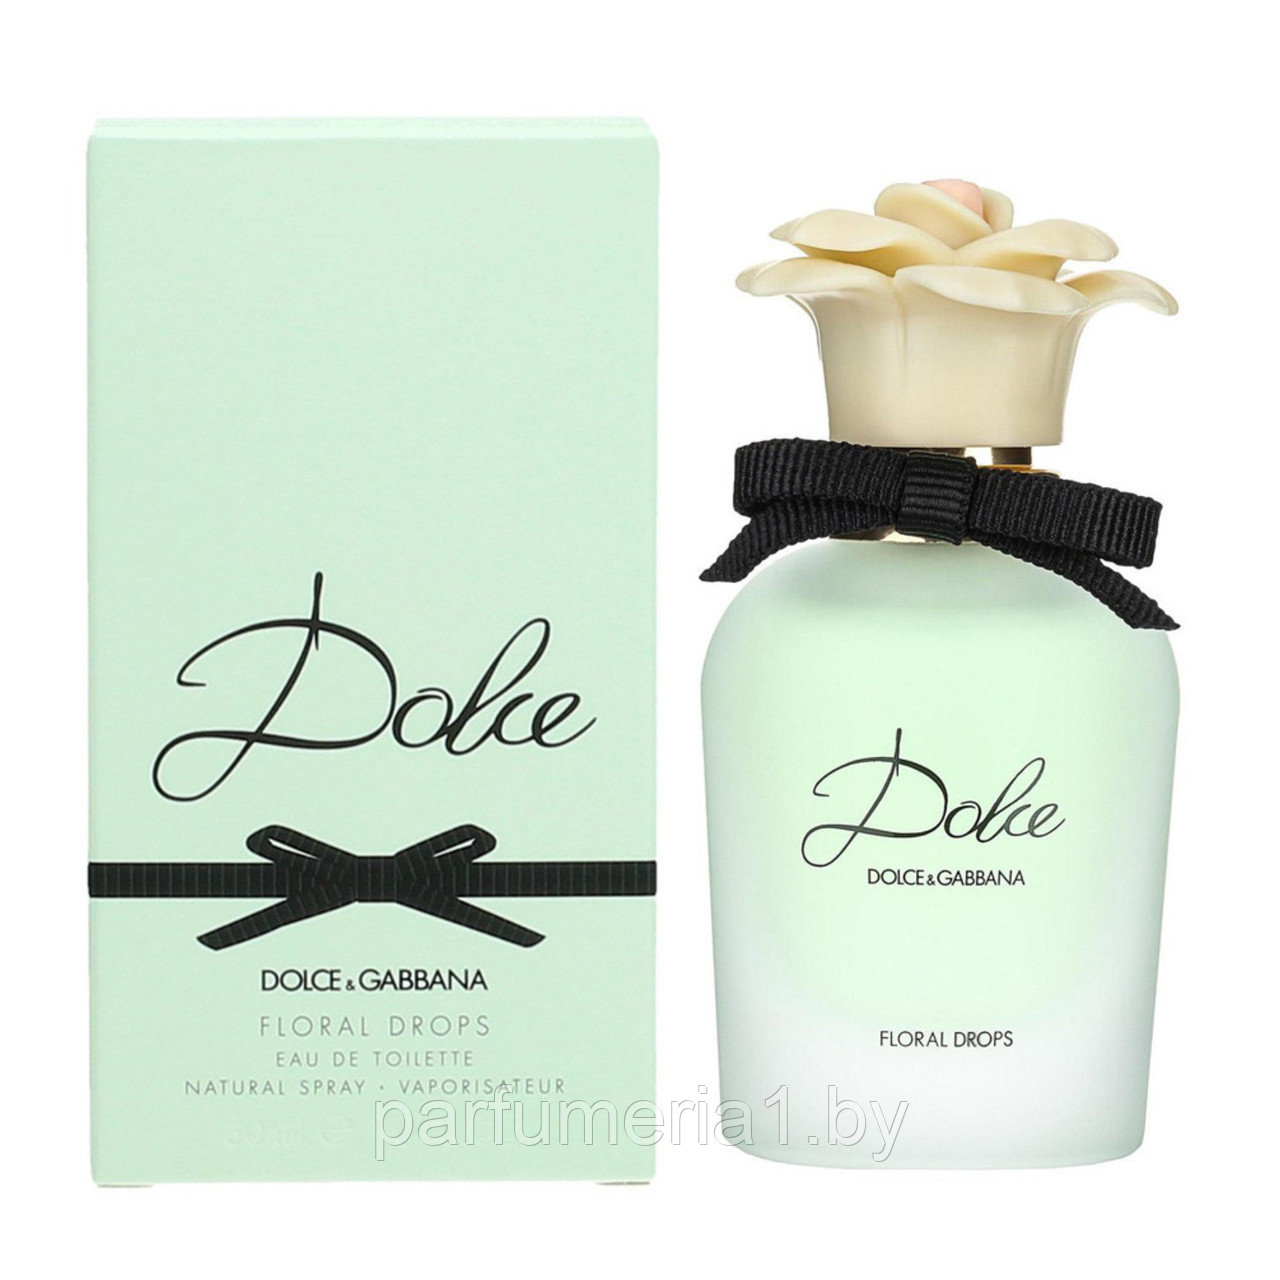 DOLCE & GABBANA DOLCE FLORAL DROPS - фото 1 - id-p63158253